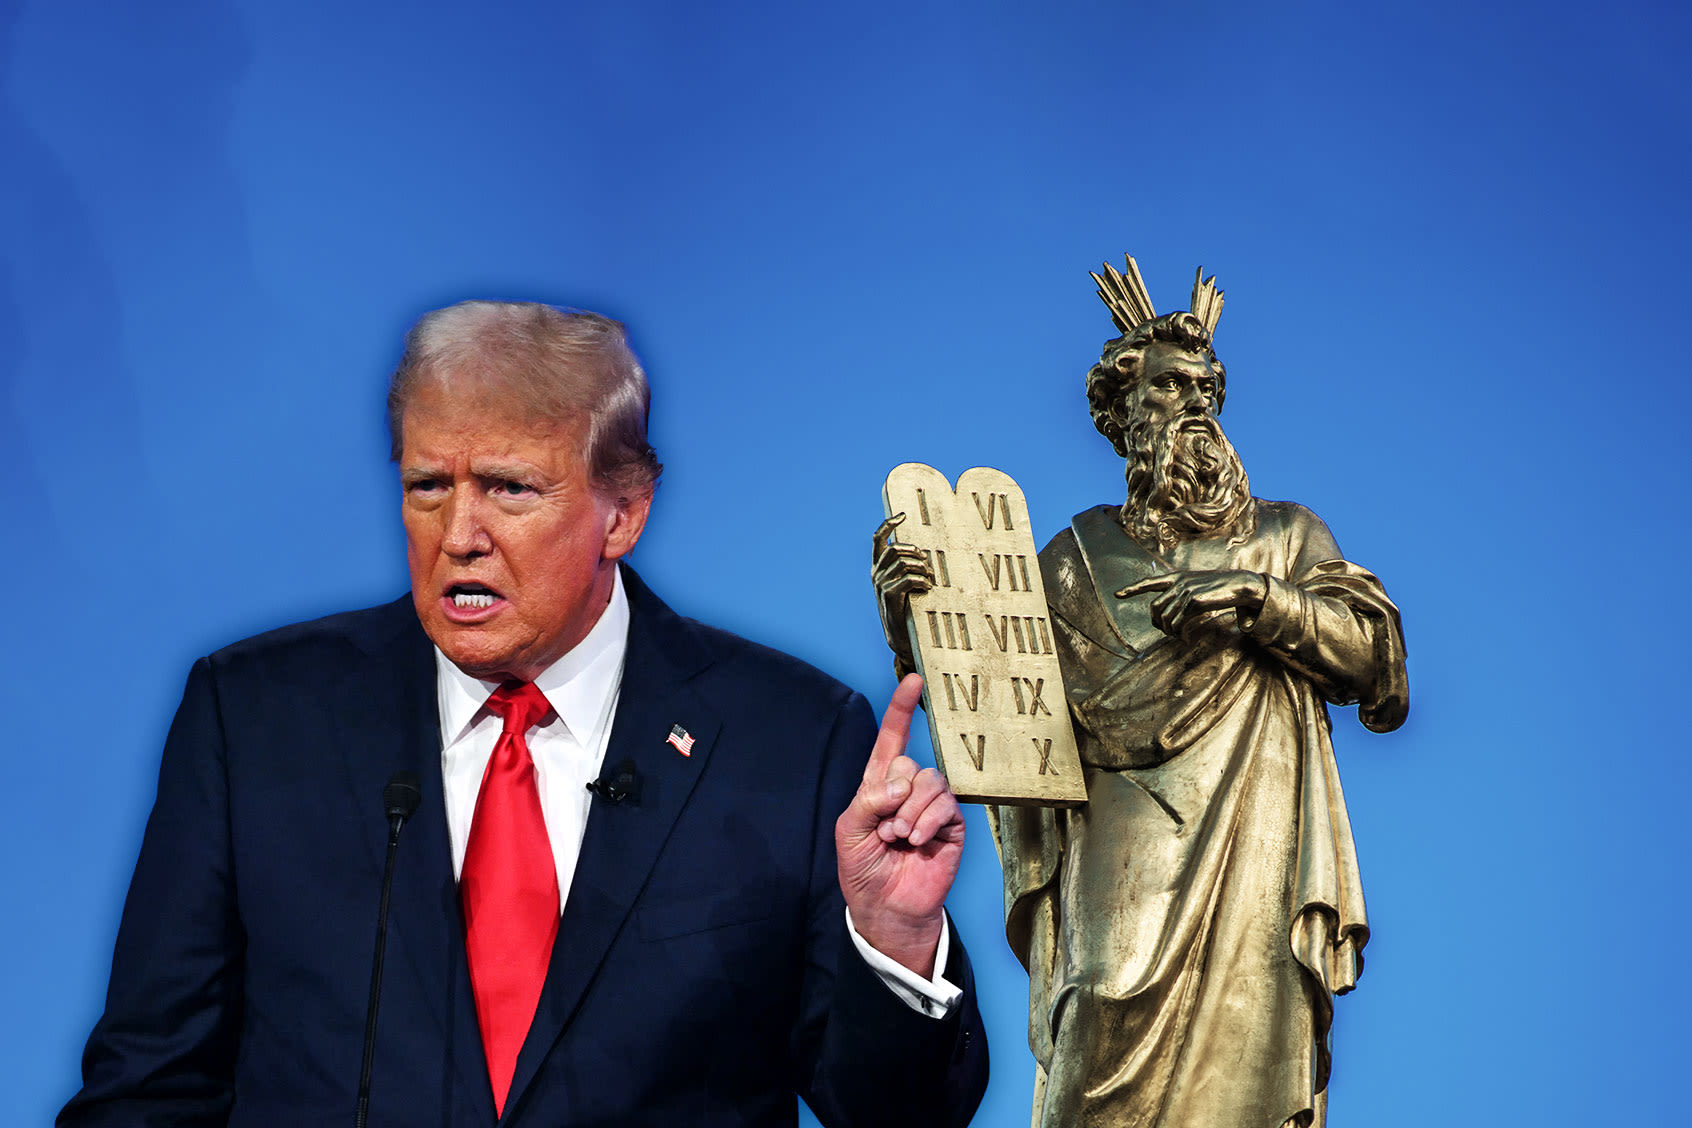 Ten Commandments gone wild! The Christian right's latest toxic distraction